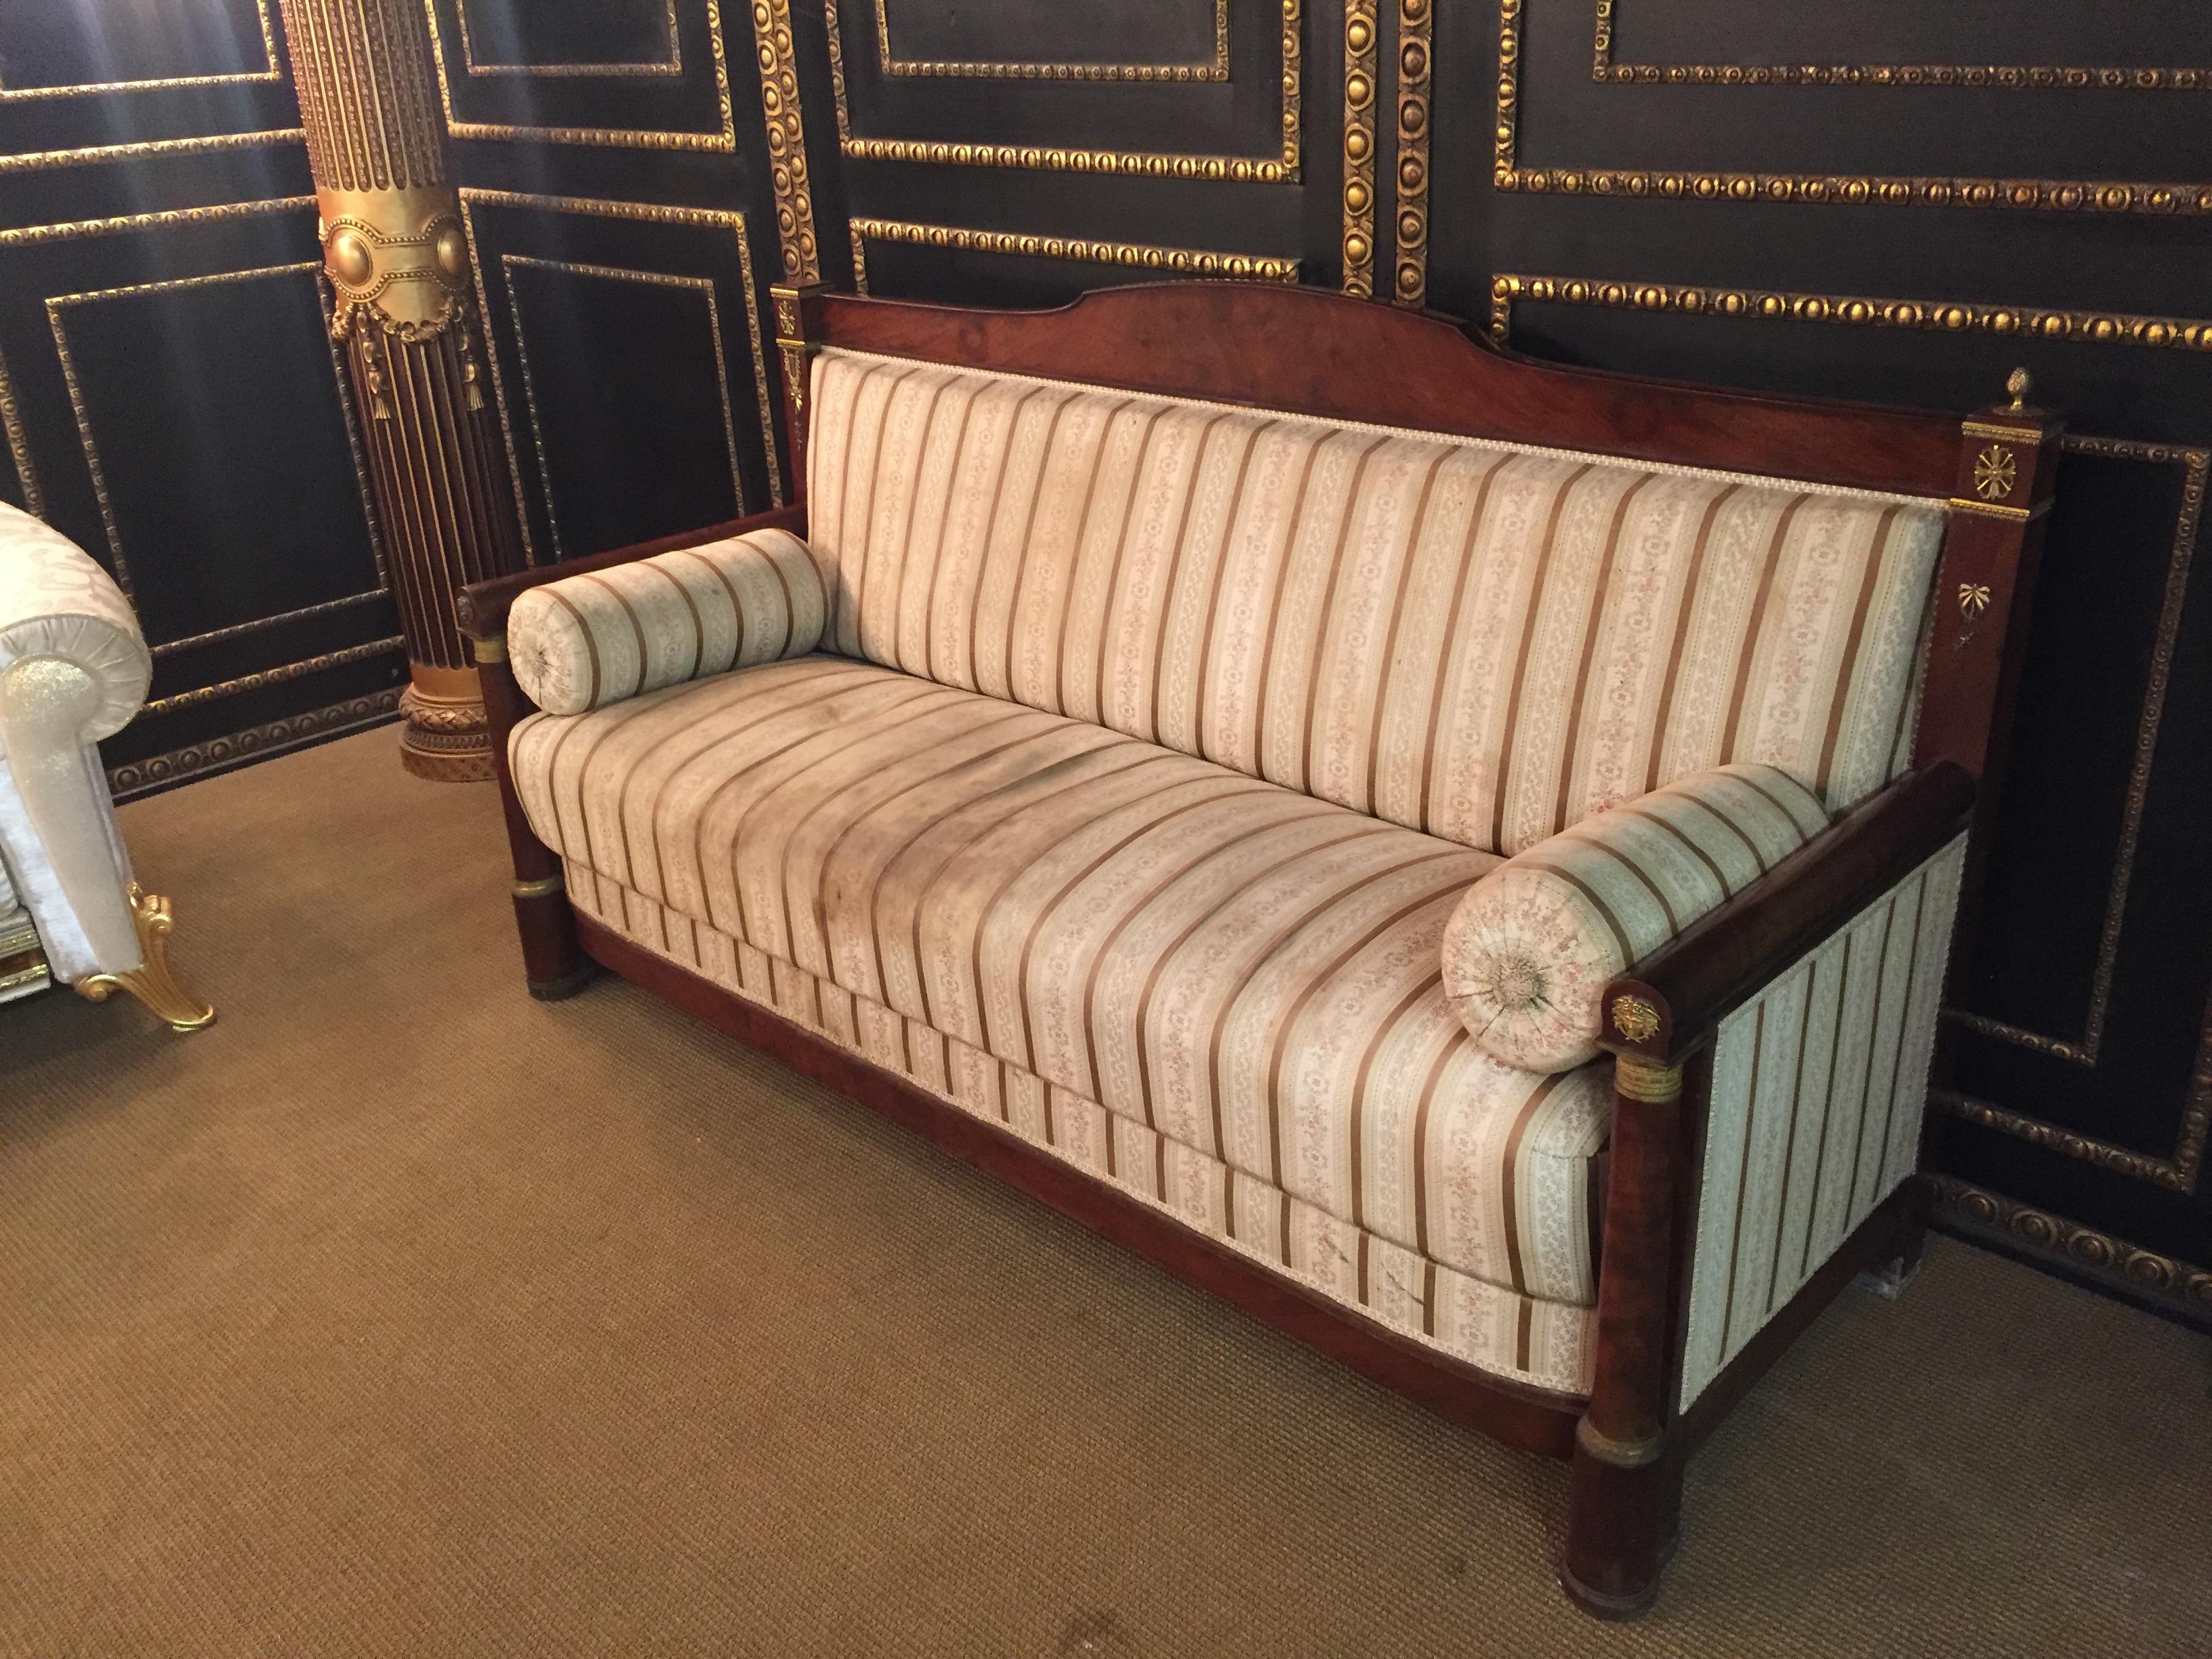 Original French Empire sofa, circa 1800.
Mahogany,
right and left, each with columns and fire-gilt bronze fittings.

Some bronze are missing.
   